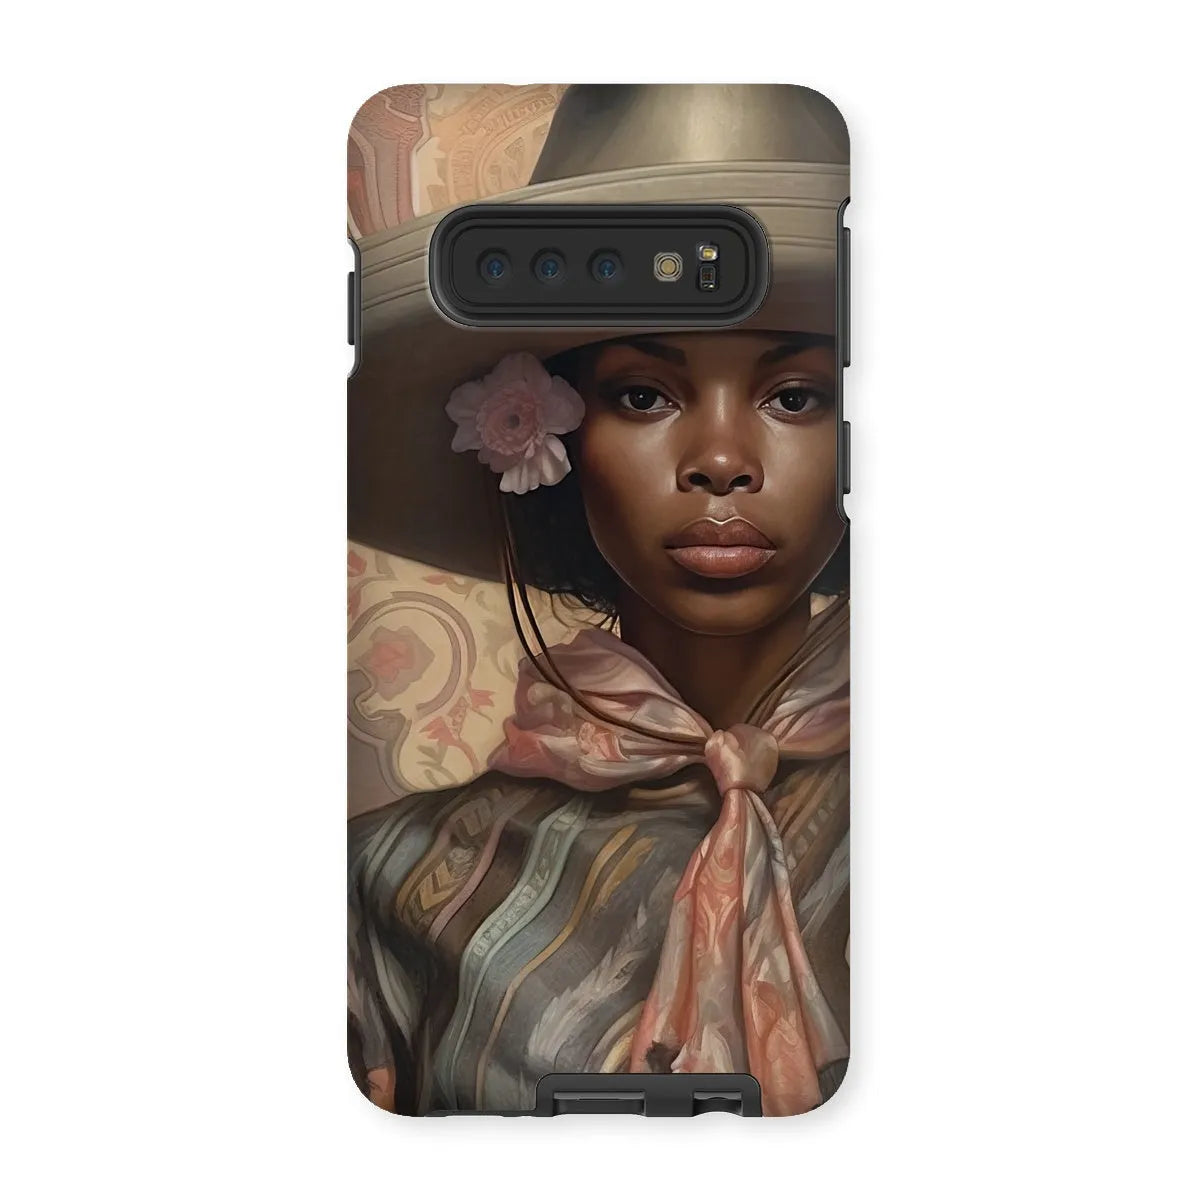 Sadie The Lesbian Cowgirl - Sapphic Art Phone Case - Samsung Galaxy S10 / Matte - Mobile Phone Cases - Aesthetic Art